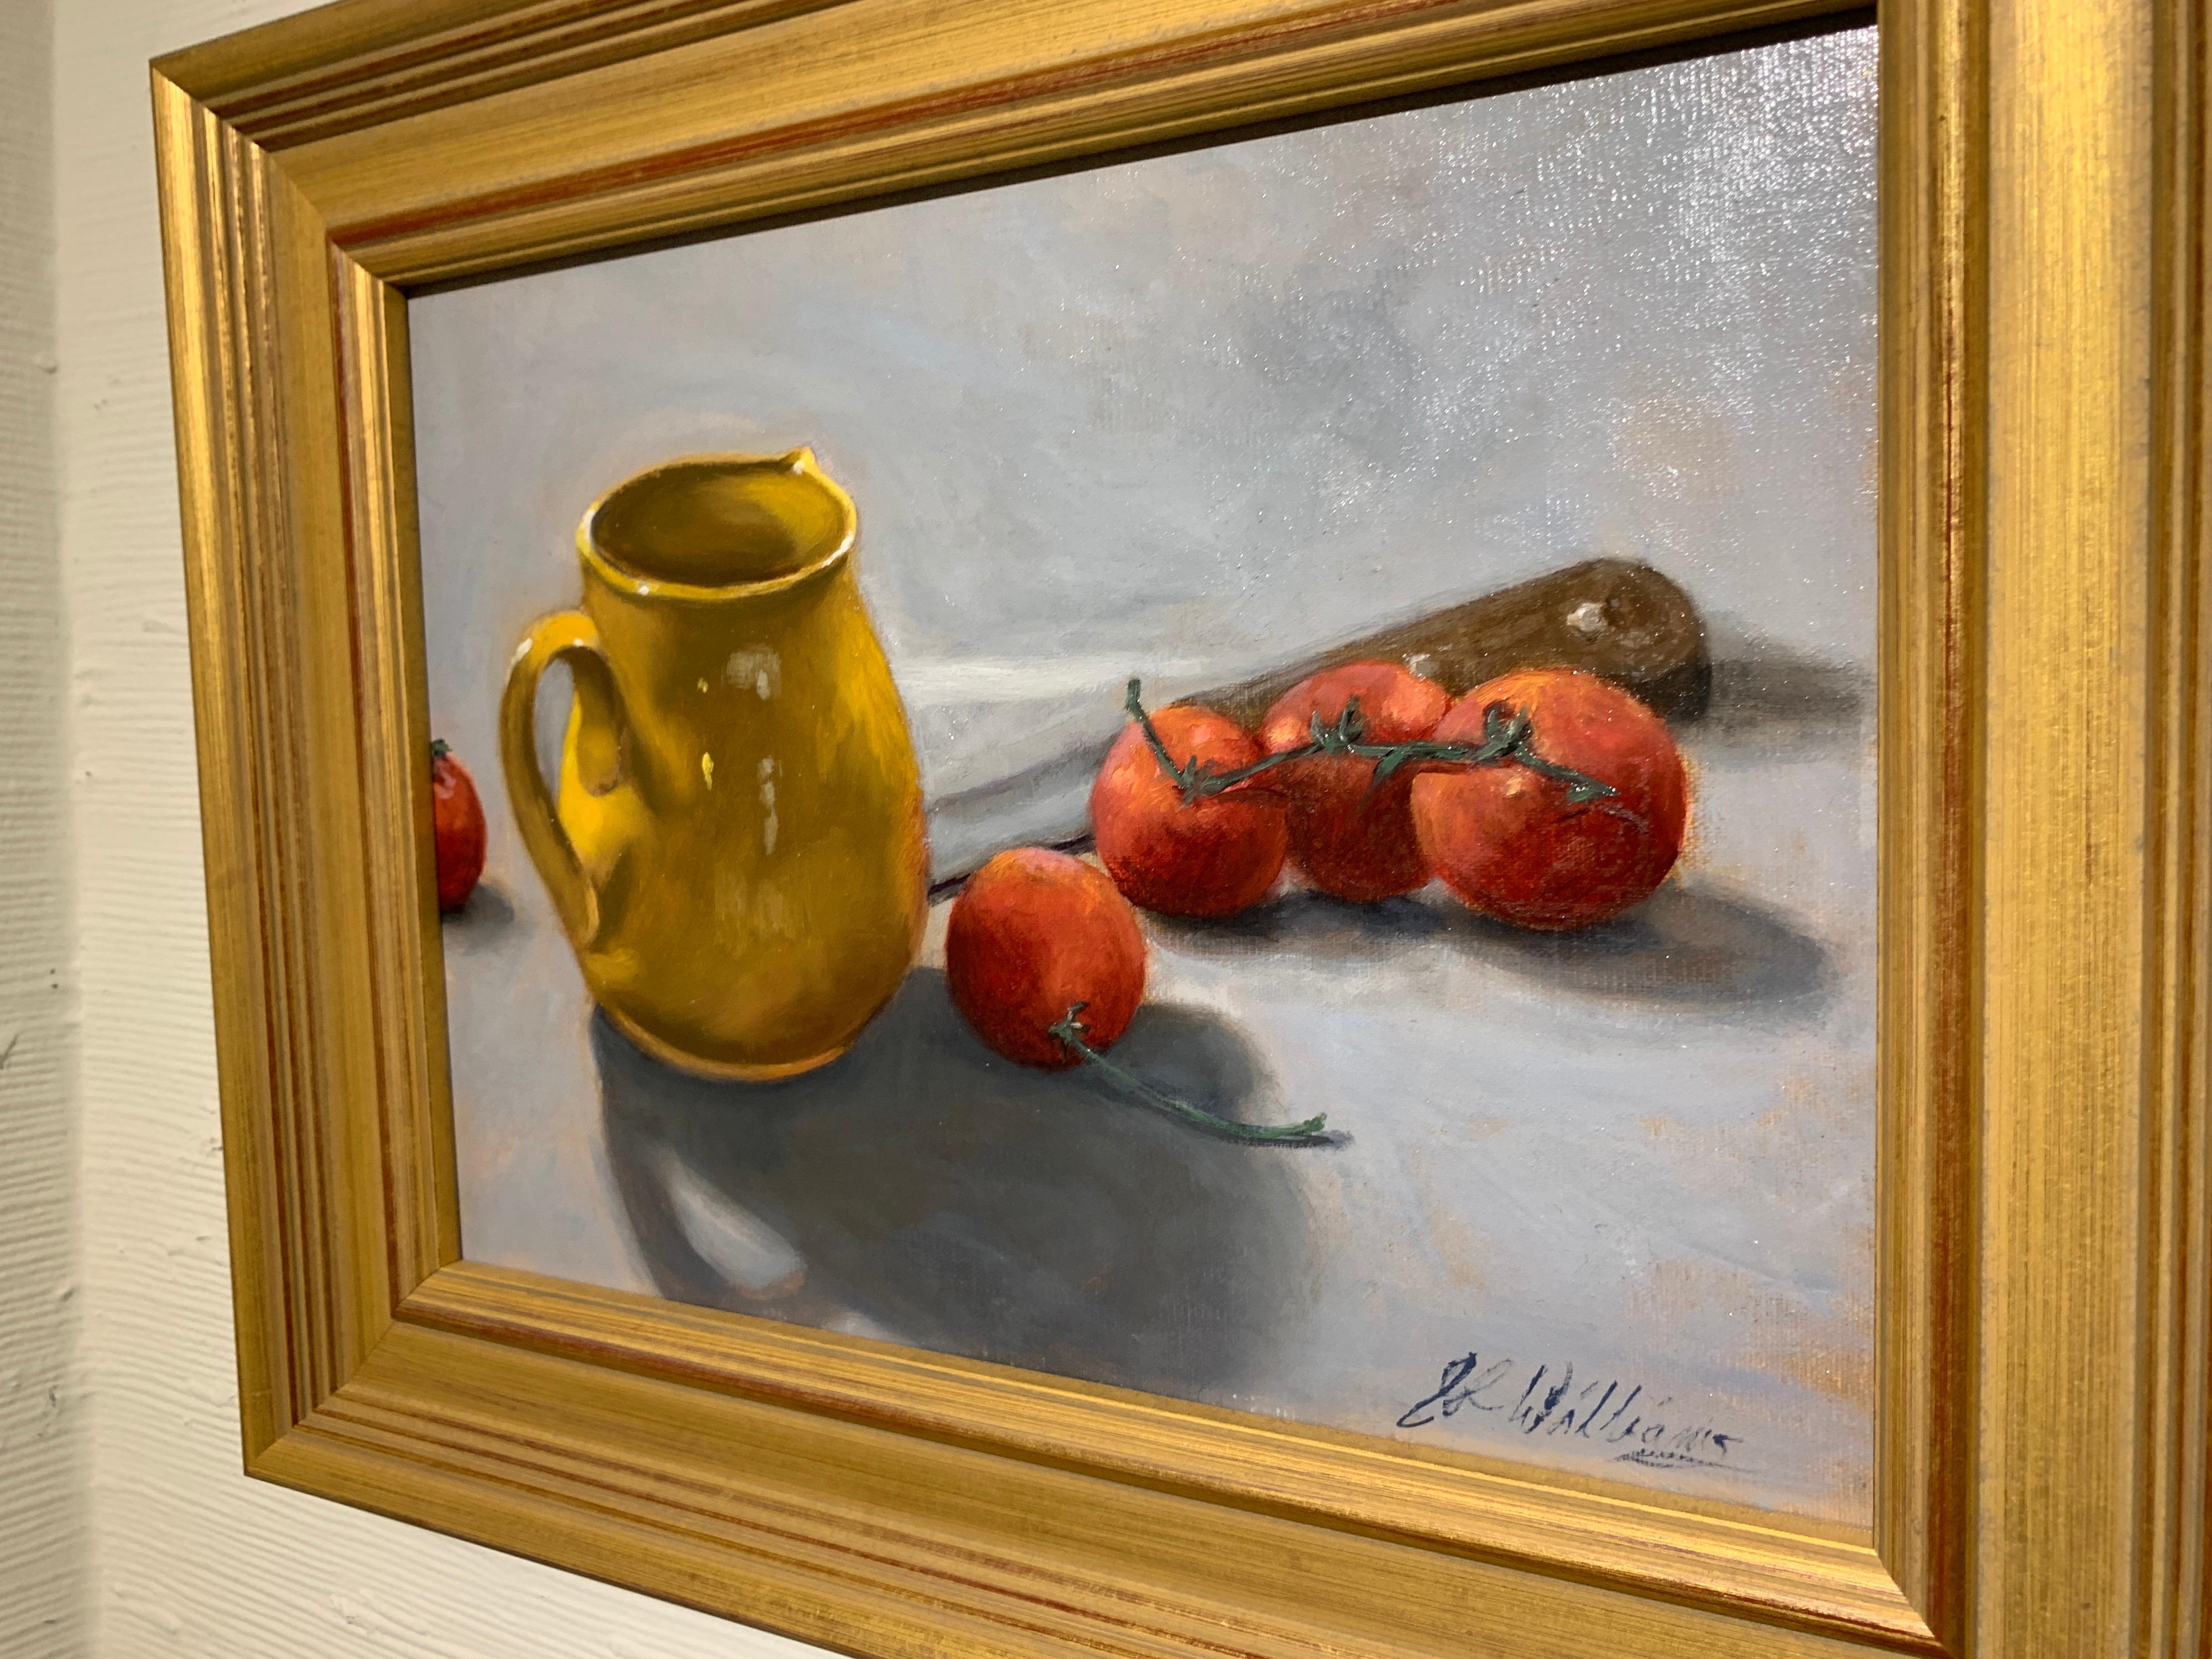 Set inside a gilt molded frame, this oil on linen still-life painting is signed lower right. Without its frame, it measures 9 x 12 inches.

We were immediately drawn to the thoughtfully painted work, the clever titles and the rich, deep hues. And